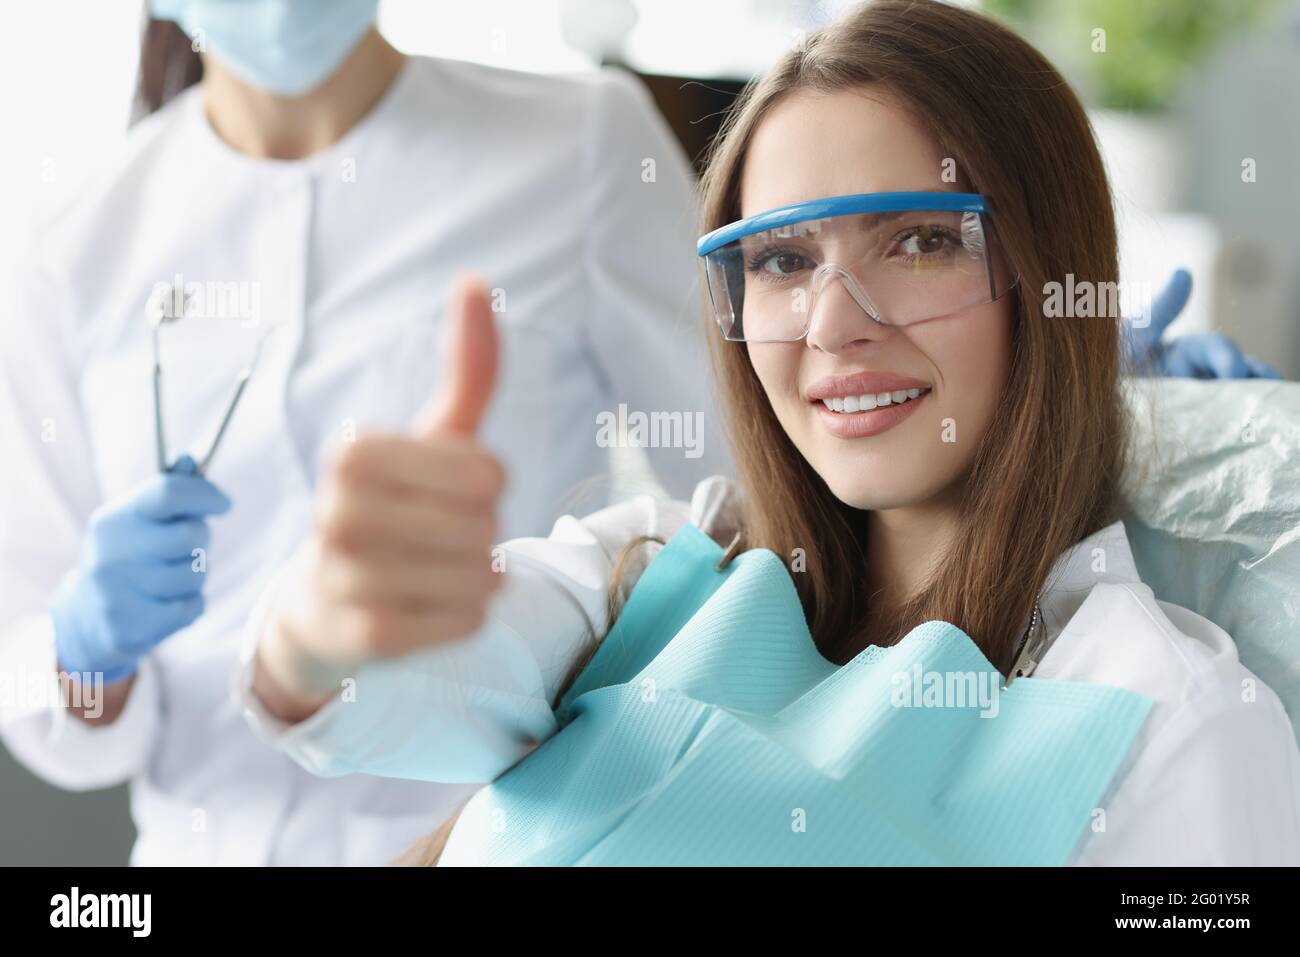 Portrait of smiling woman holding her thumbs up at dentist appointment Stock Photo